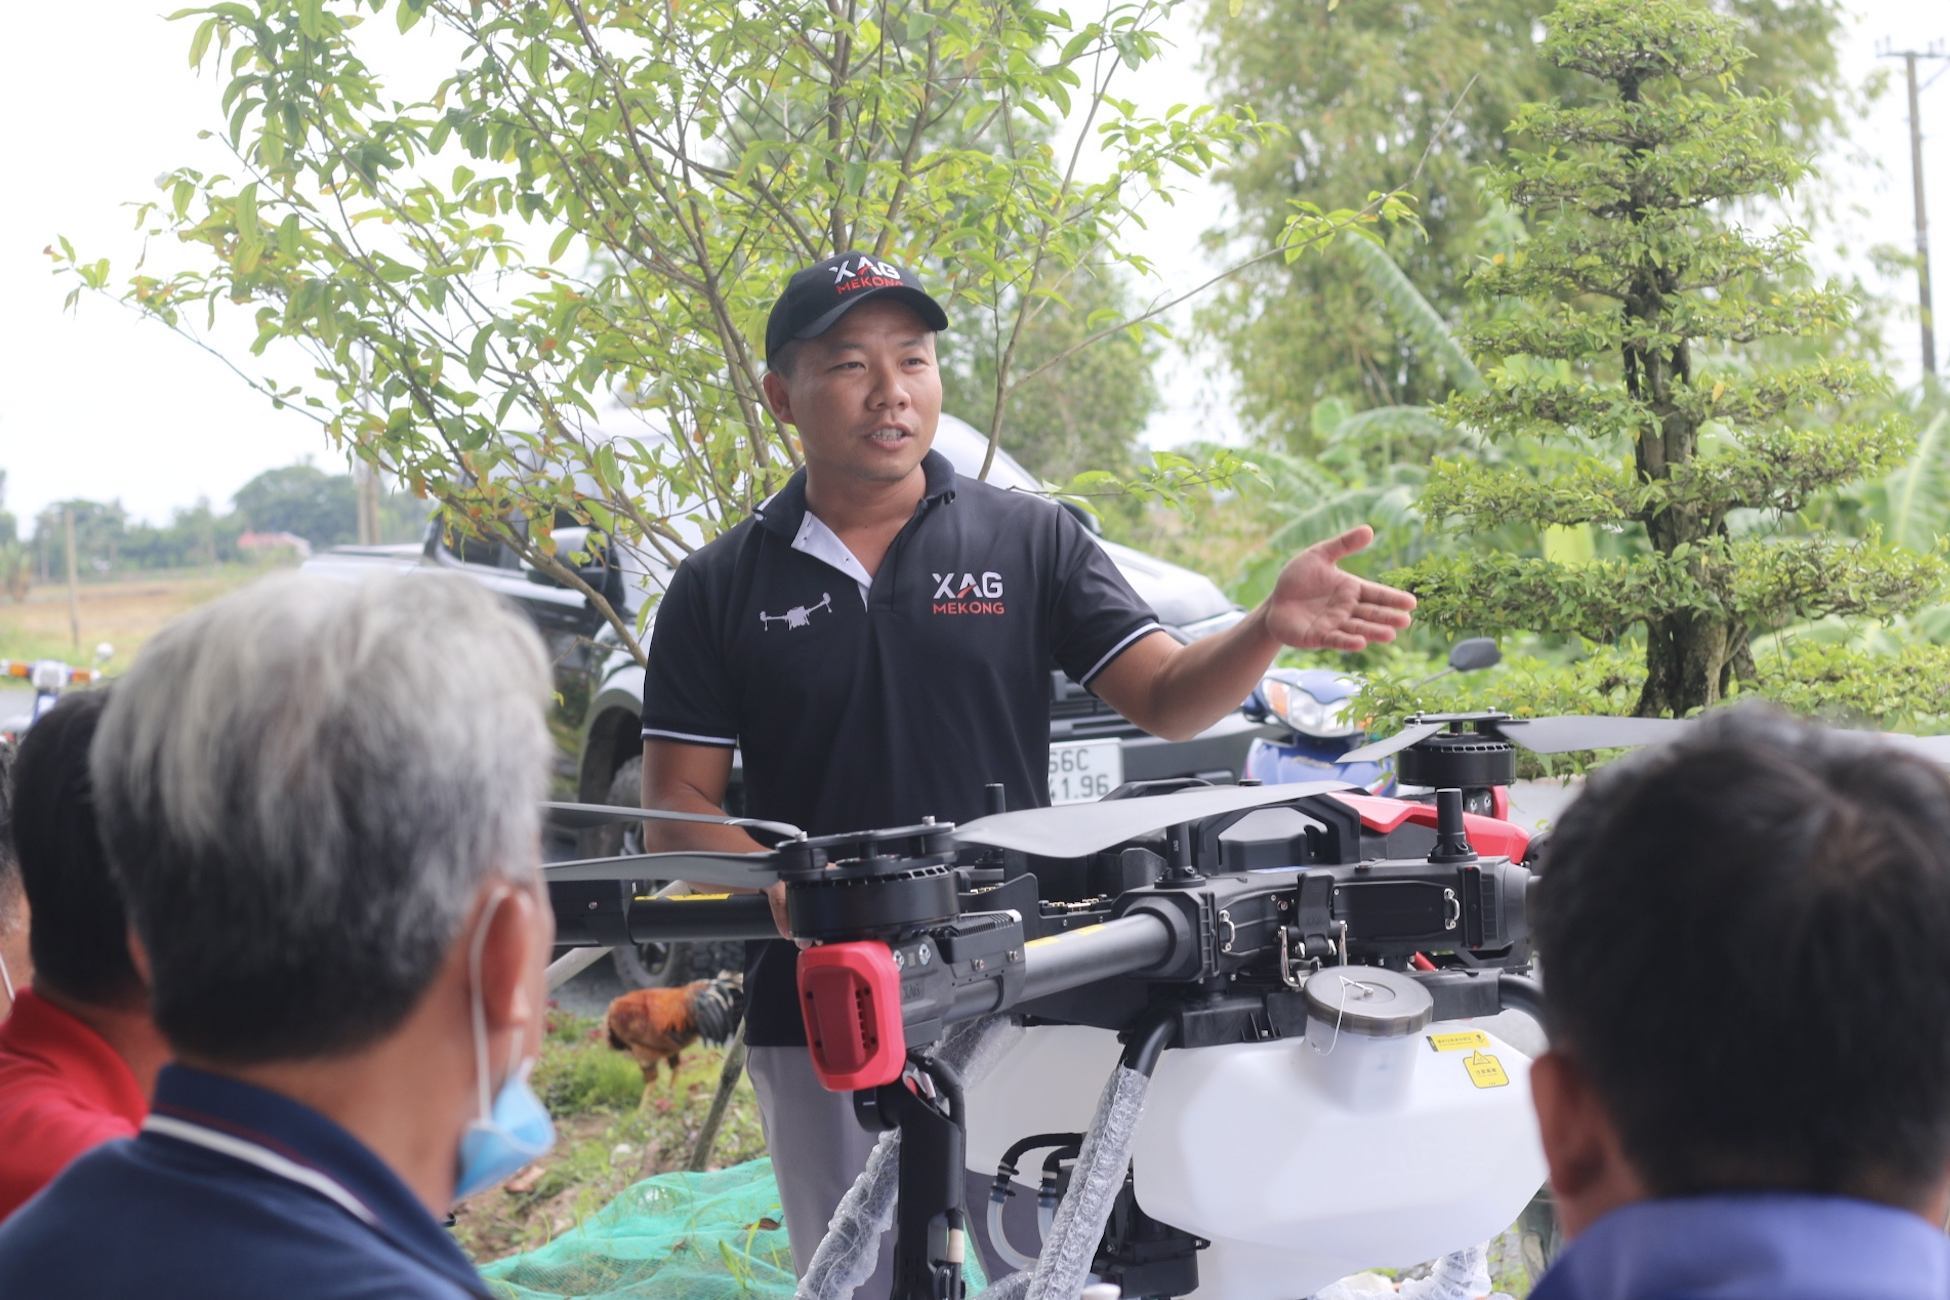 Le Quoc Trung introduced XAG P100 Agricultural Drone to Vietnam farmers